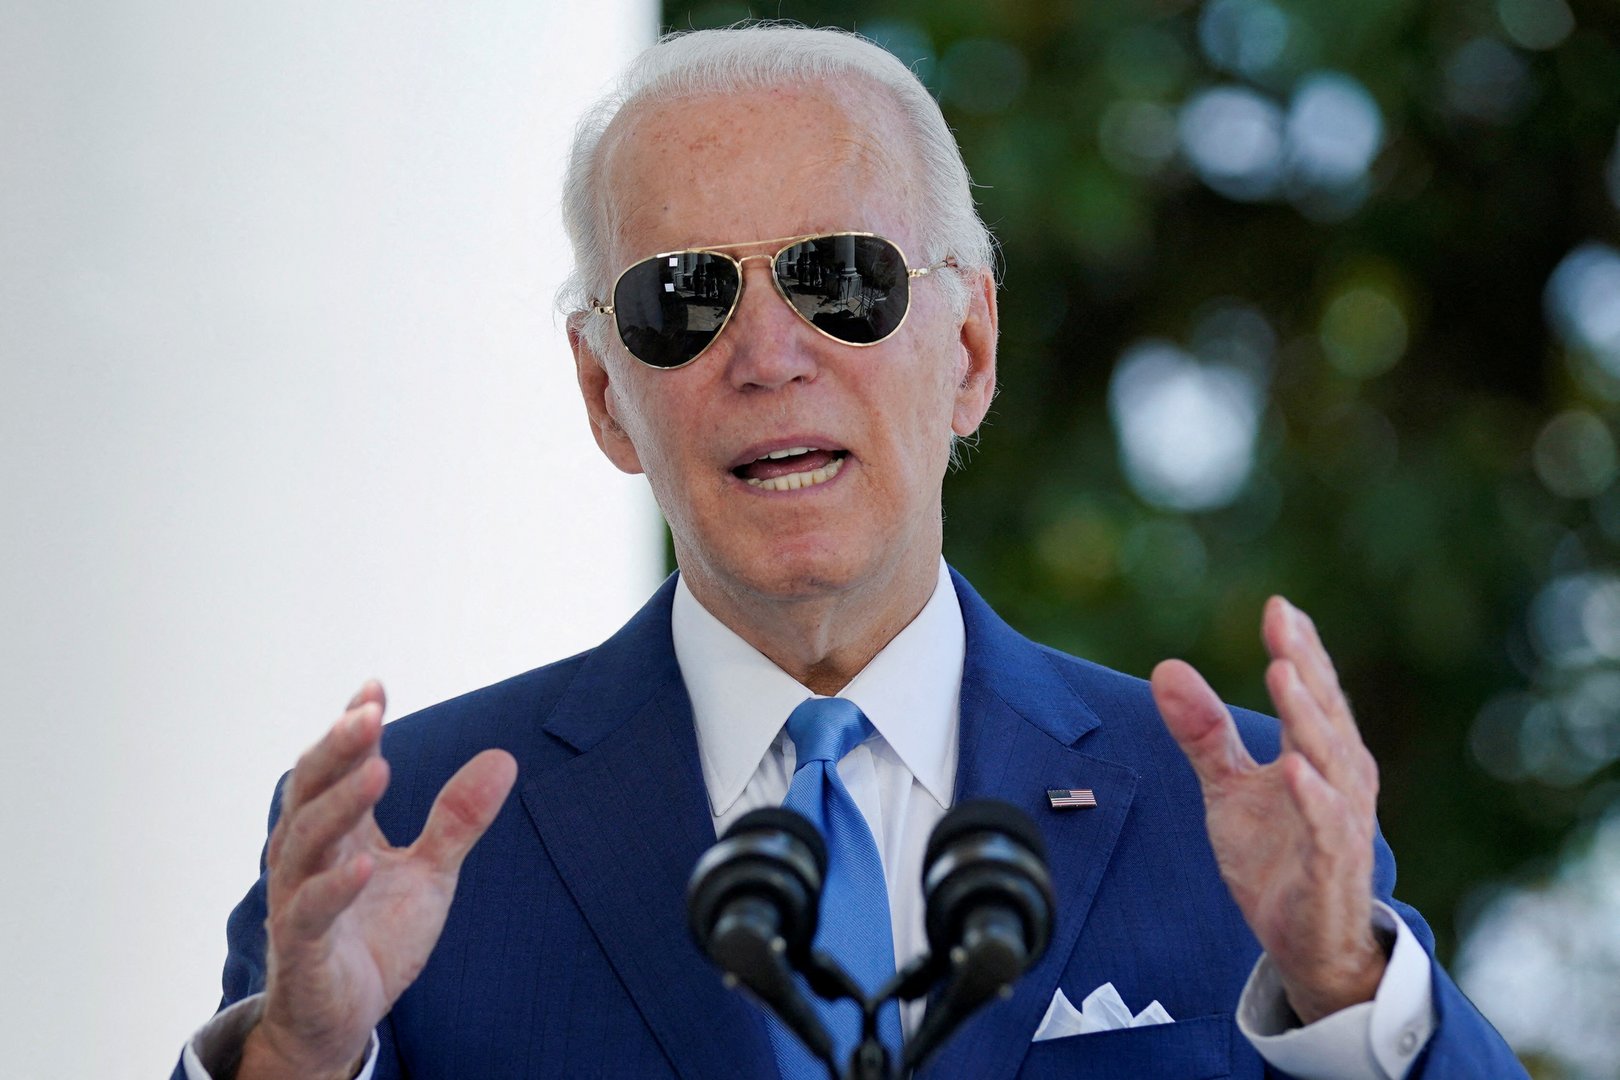 image Biden condemns Russian missile strikes, says U.S. will continue to impose costs